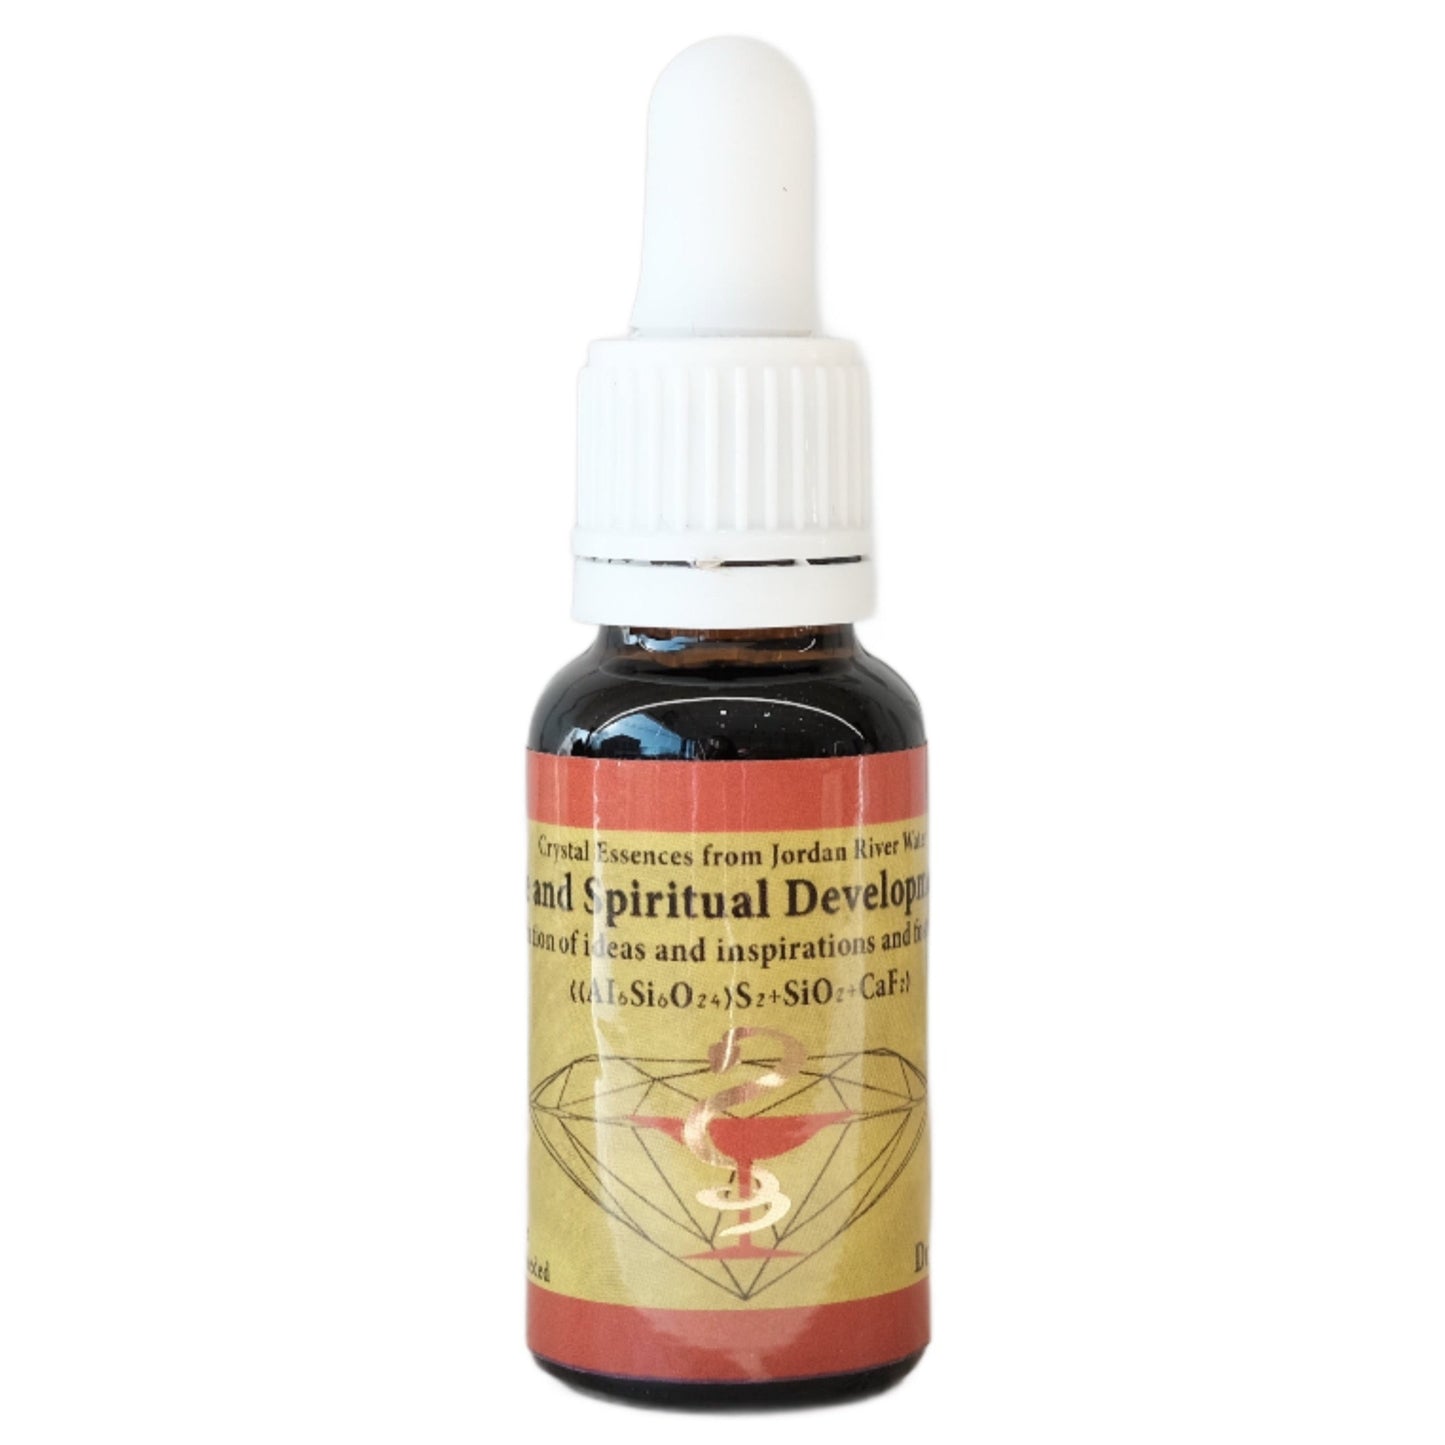 Competence and Spiritual Development and Growth Healing Essence by Dr Gila Gavrielov 20ml